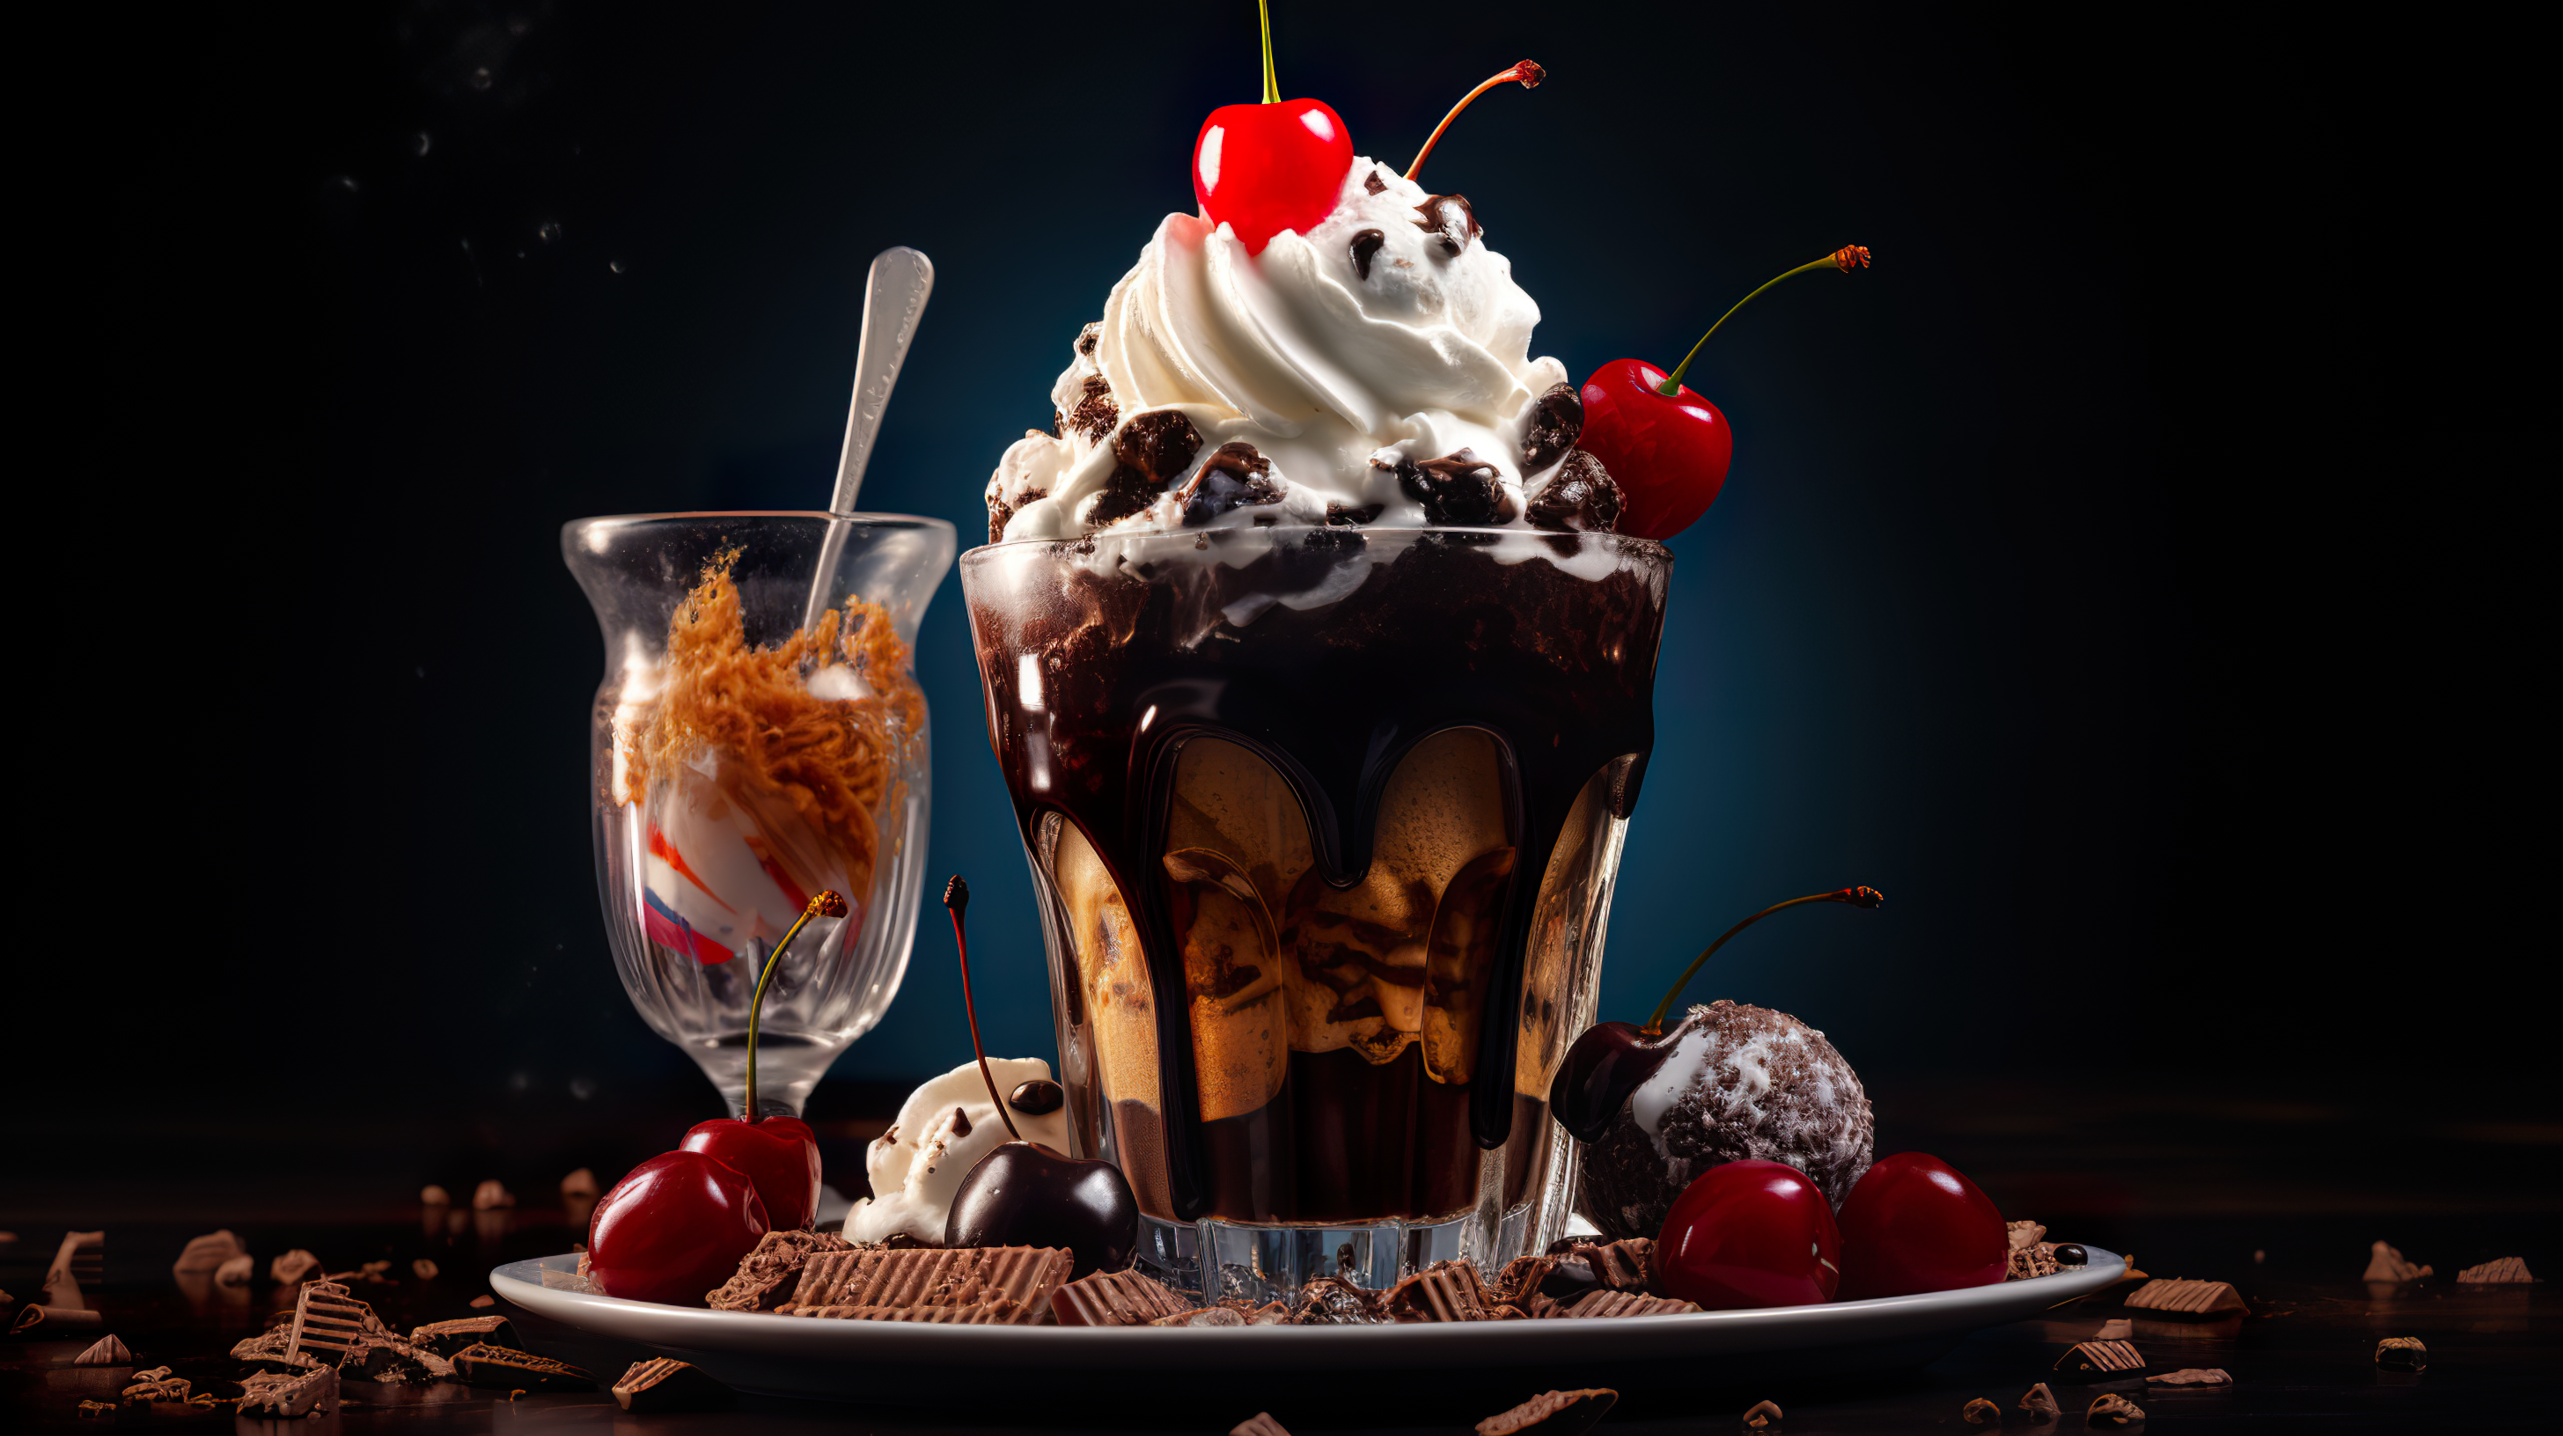 HD desktop wallpaper of a decadent chocolate sundae with whipped cream and cherries, surrounded by chocolate shavings and a caramel-filled glass.